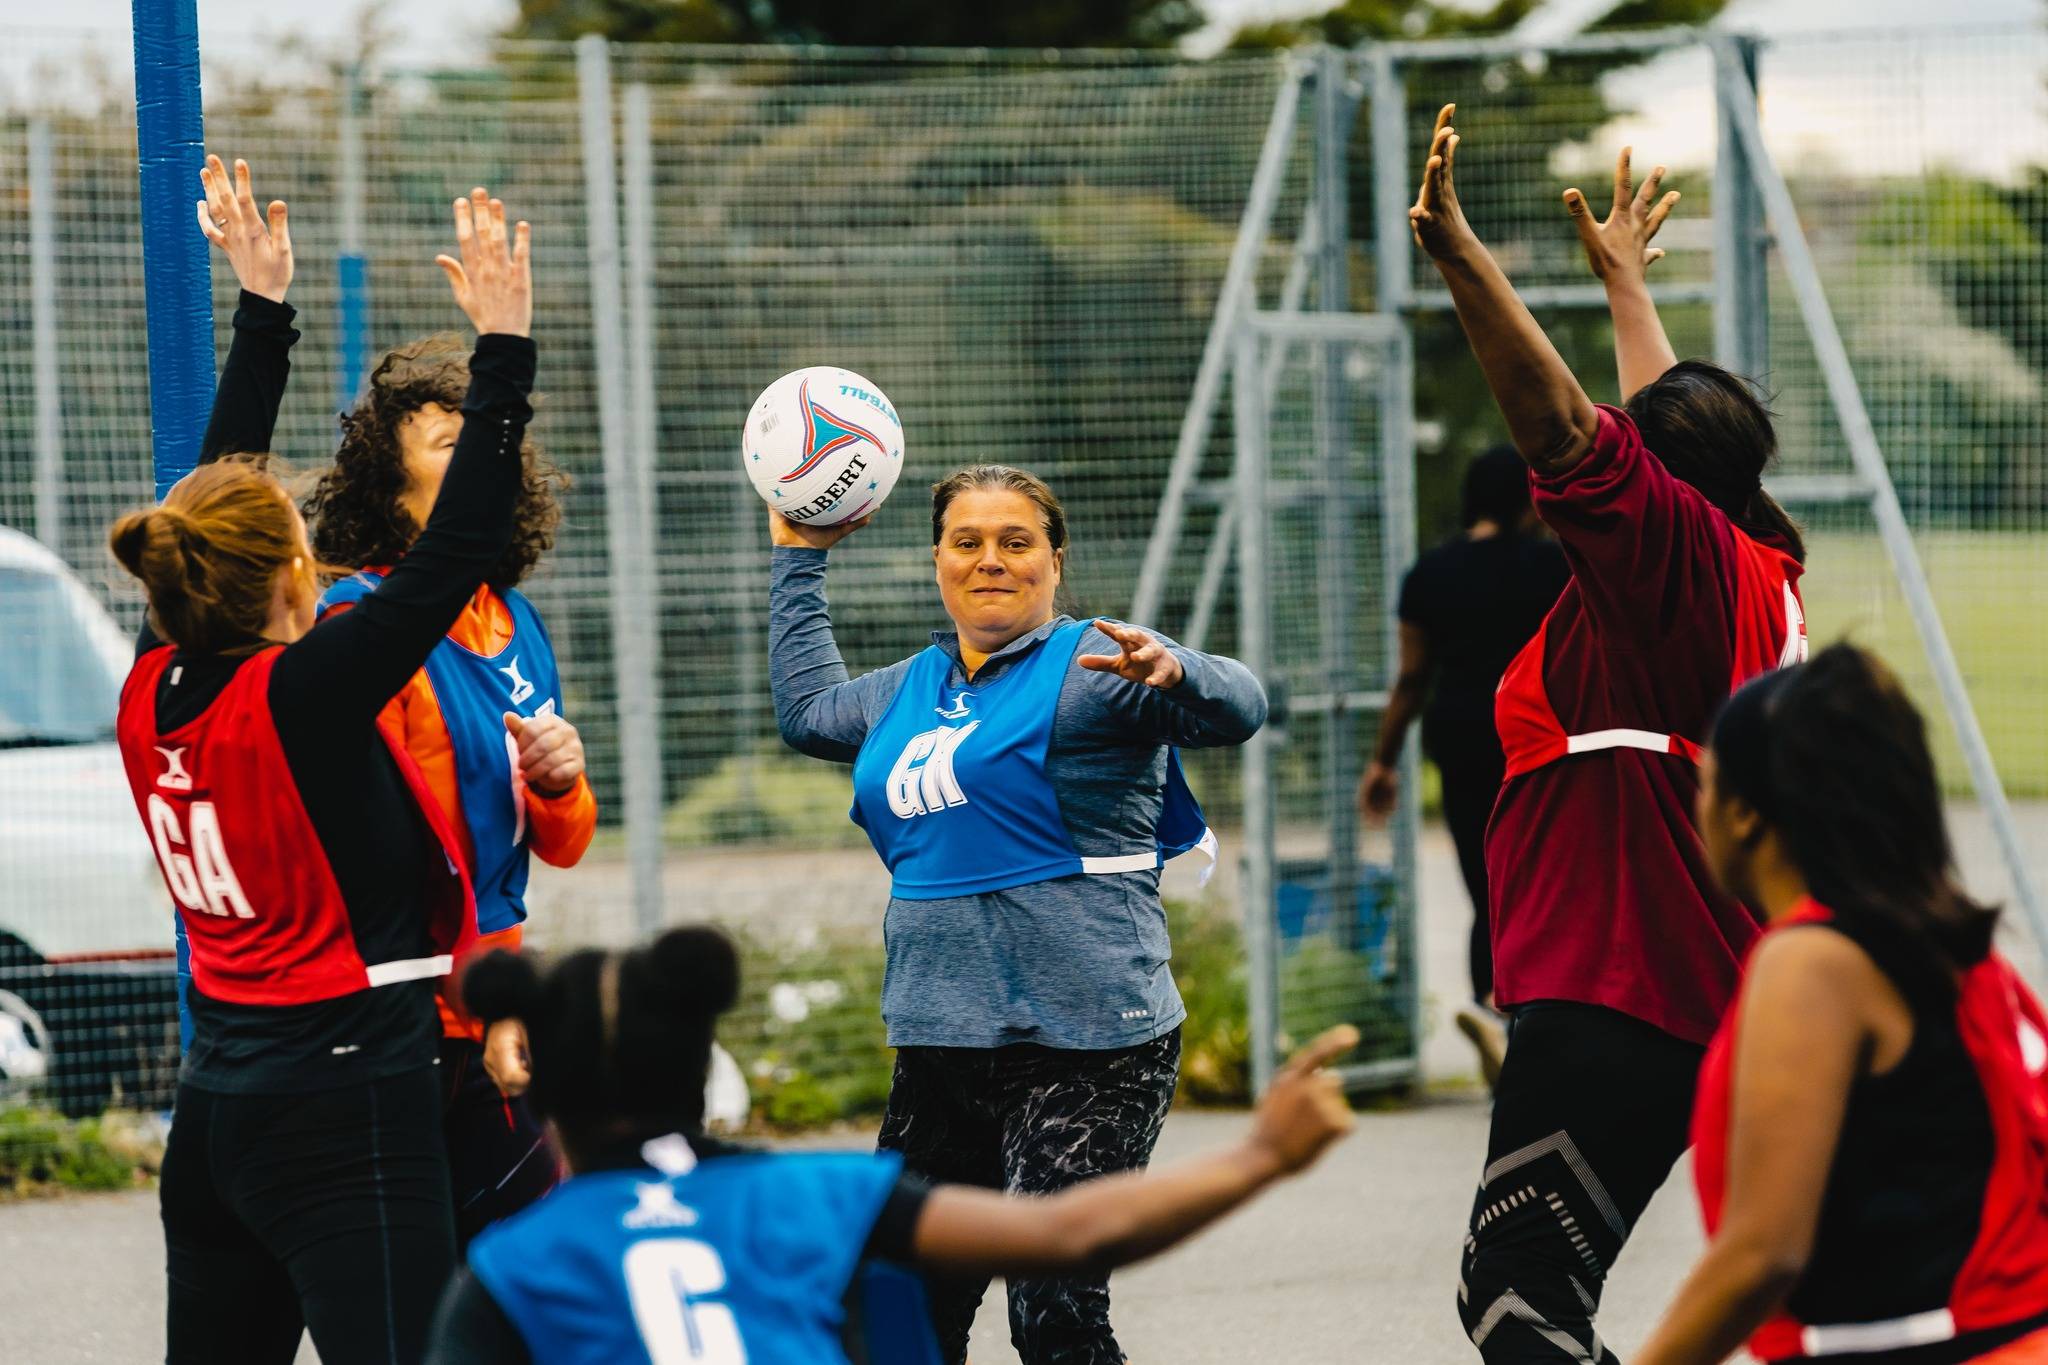 What’s driving grassroots netball interest in the UK? 